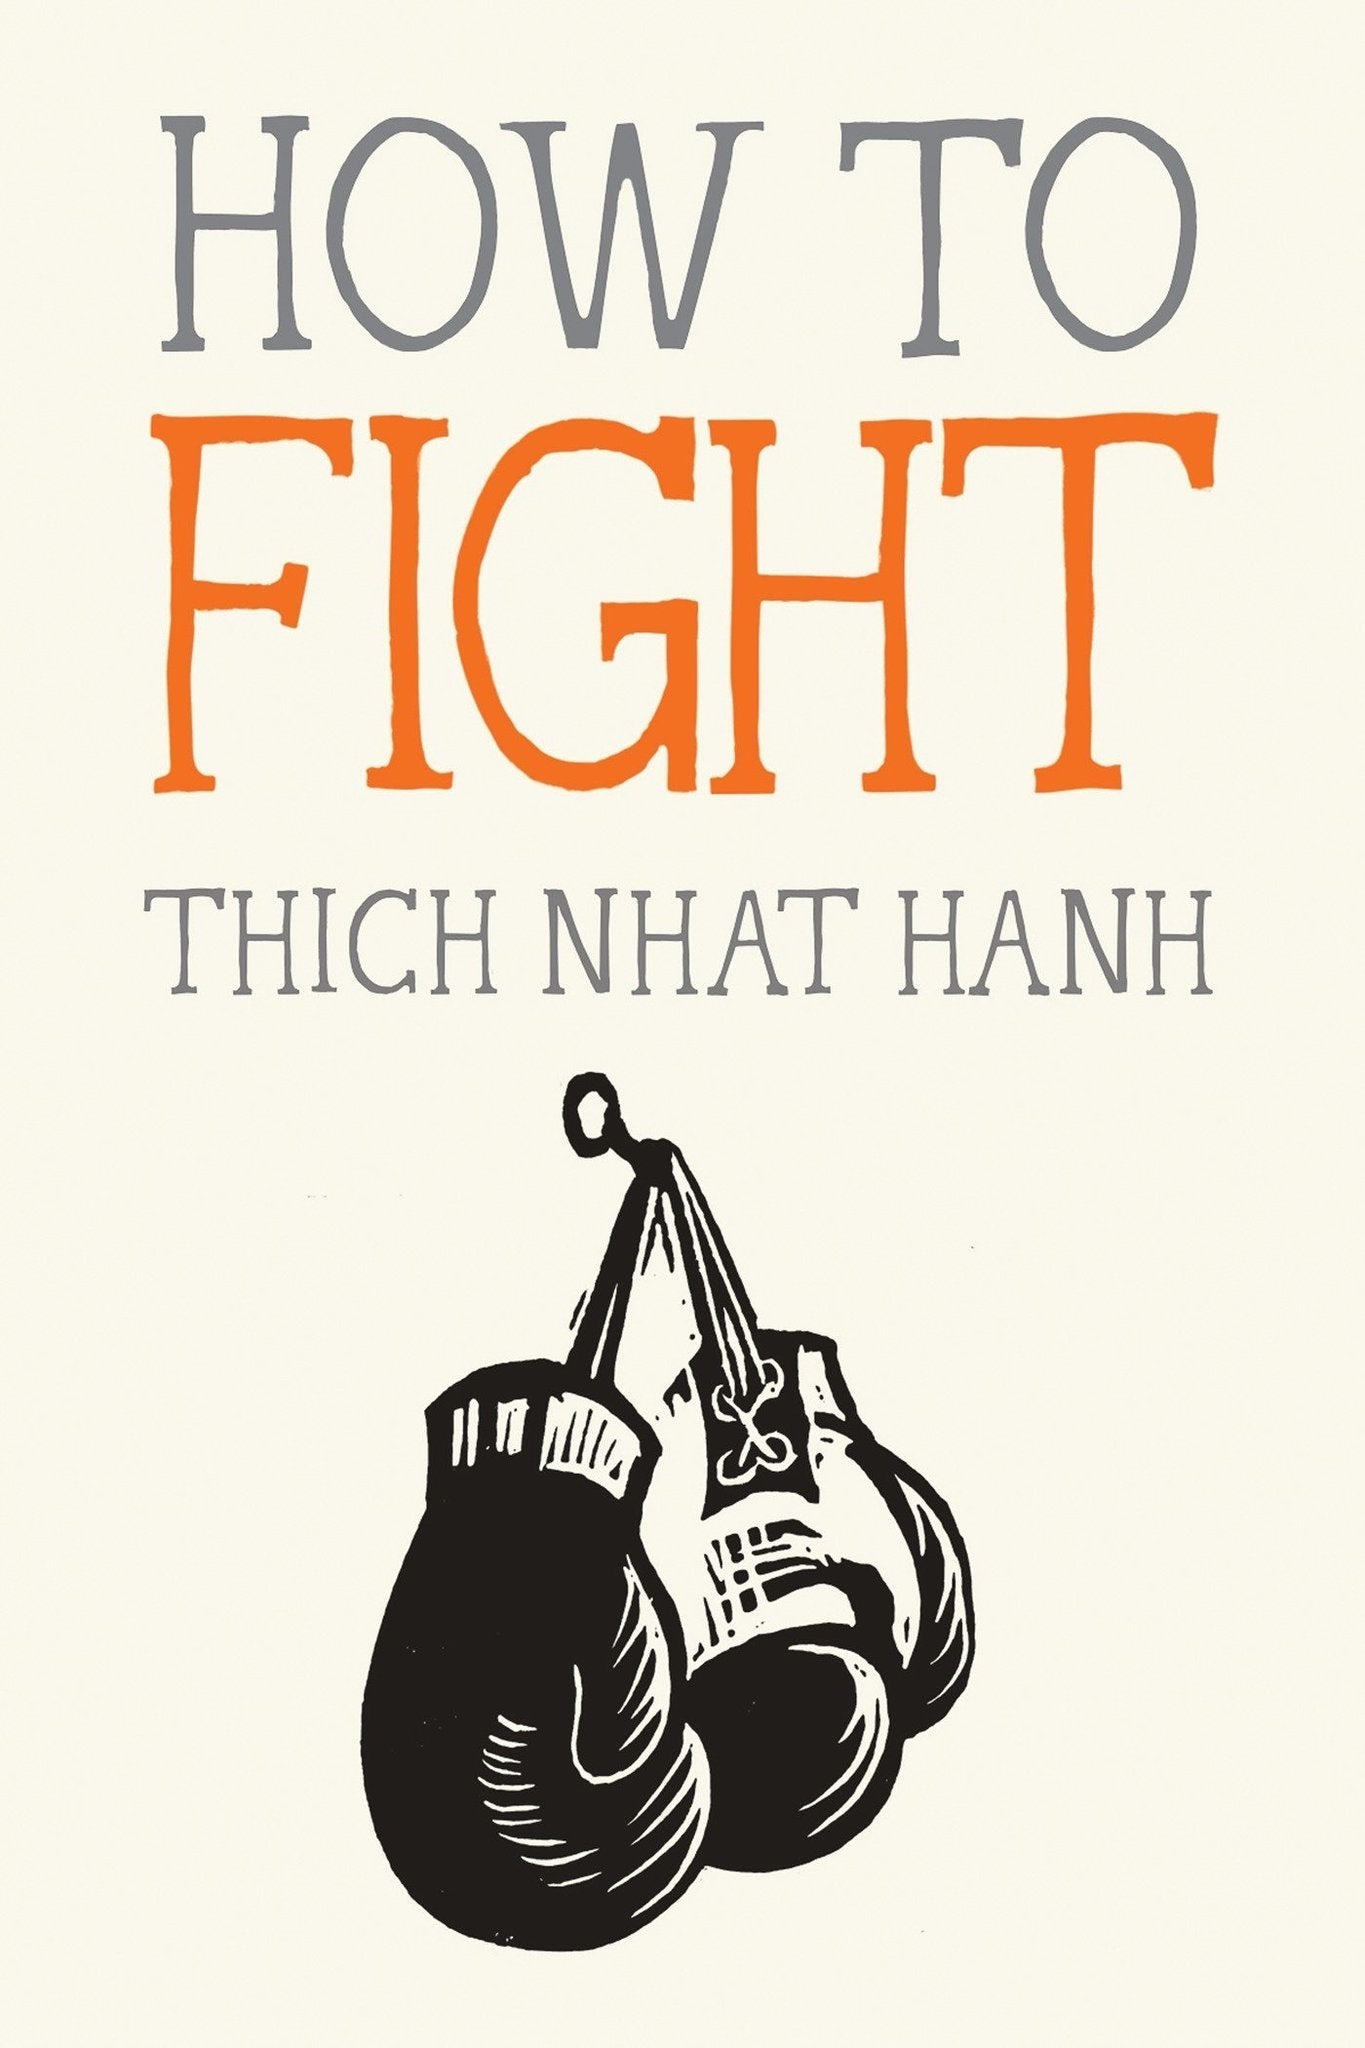 Cover of How to Fight by Thich Nhat Hanh.